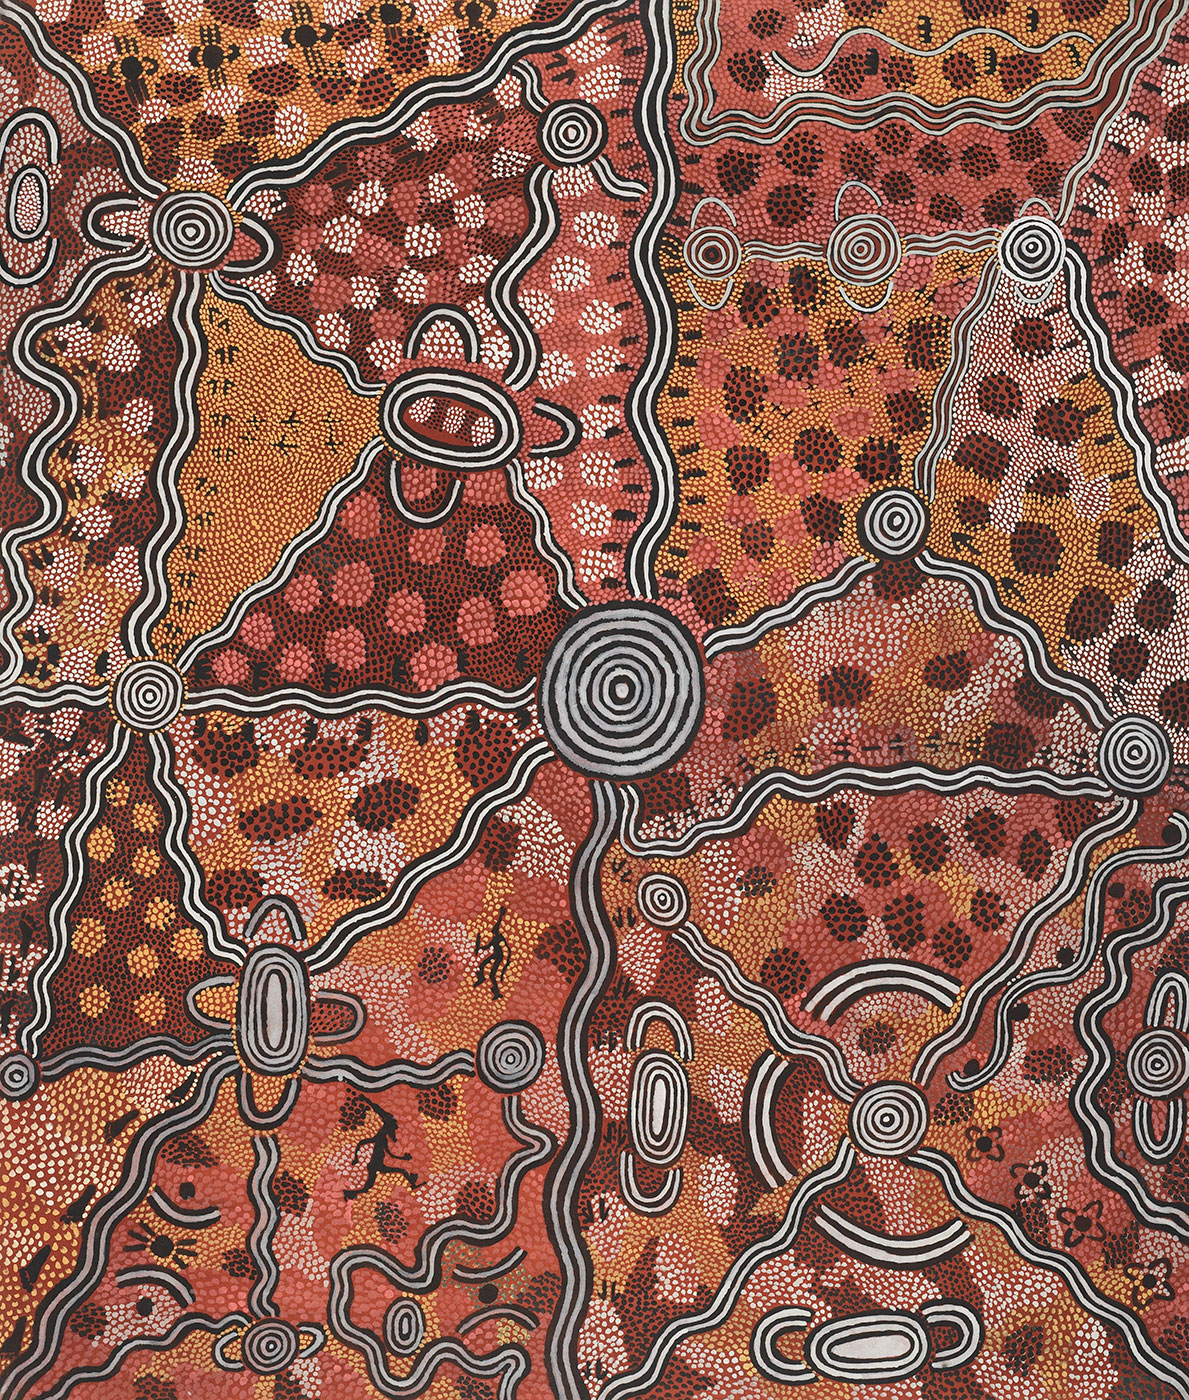 Life at Yuwa Dreaming 1974 by Billy Stockman Tjapaltjarri and Tim Leura Tjapaltjarri. - click to view larger image